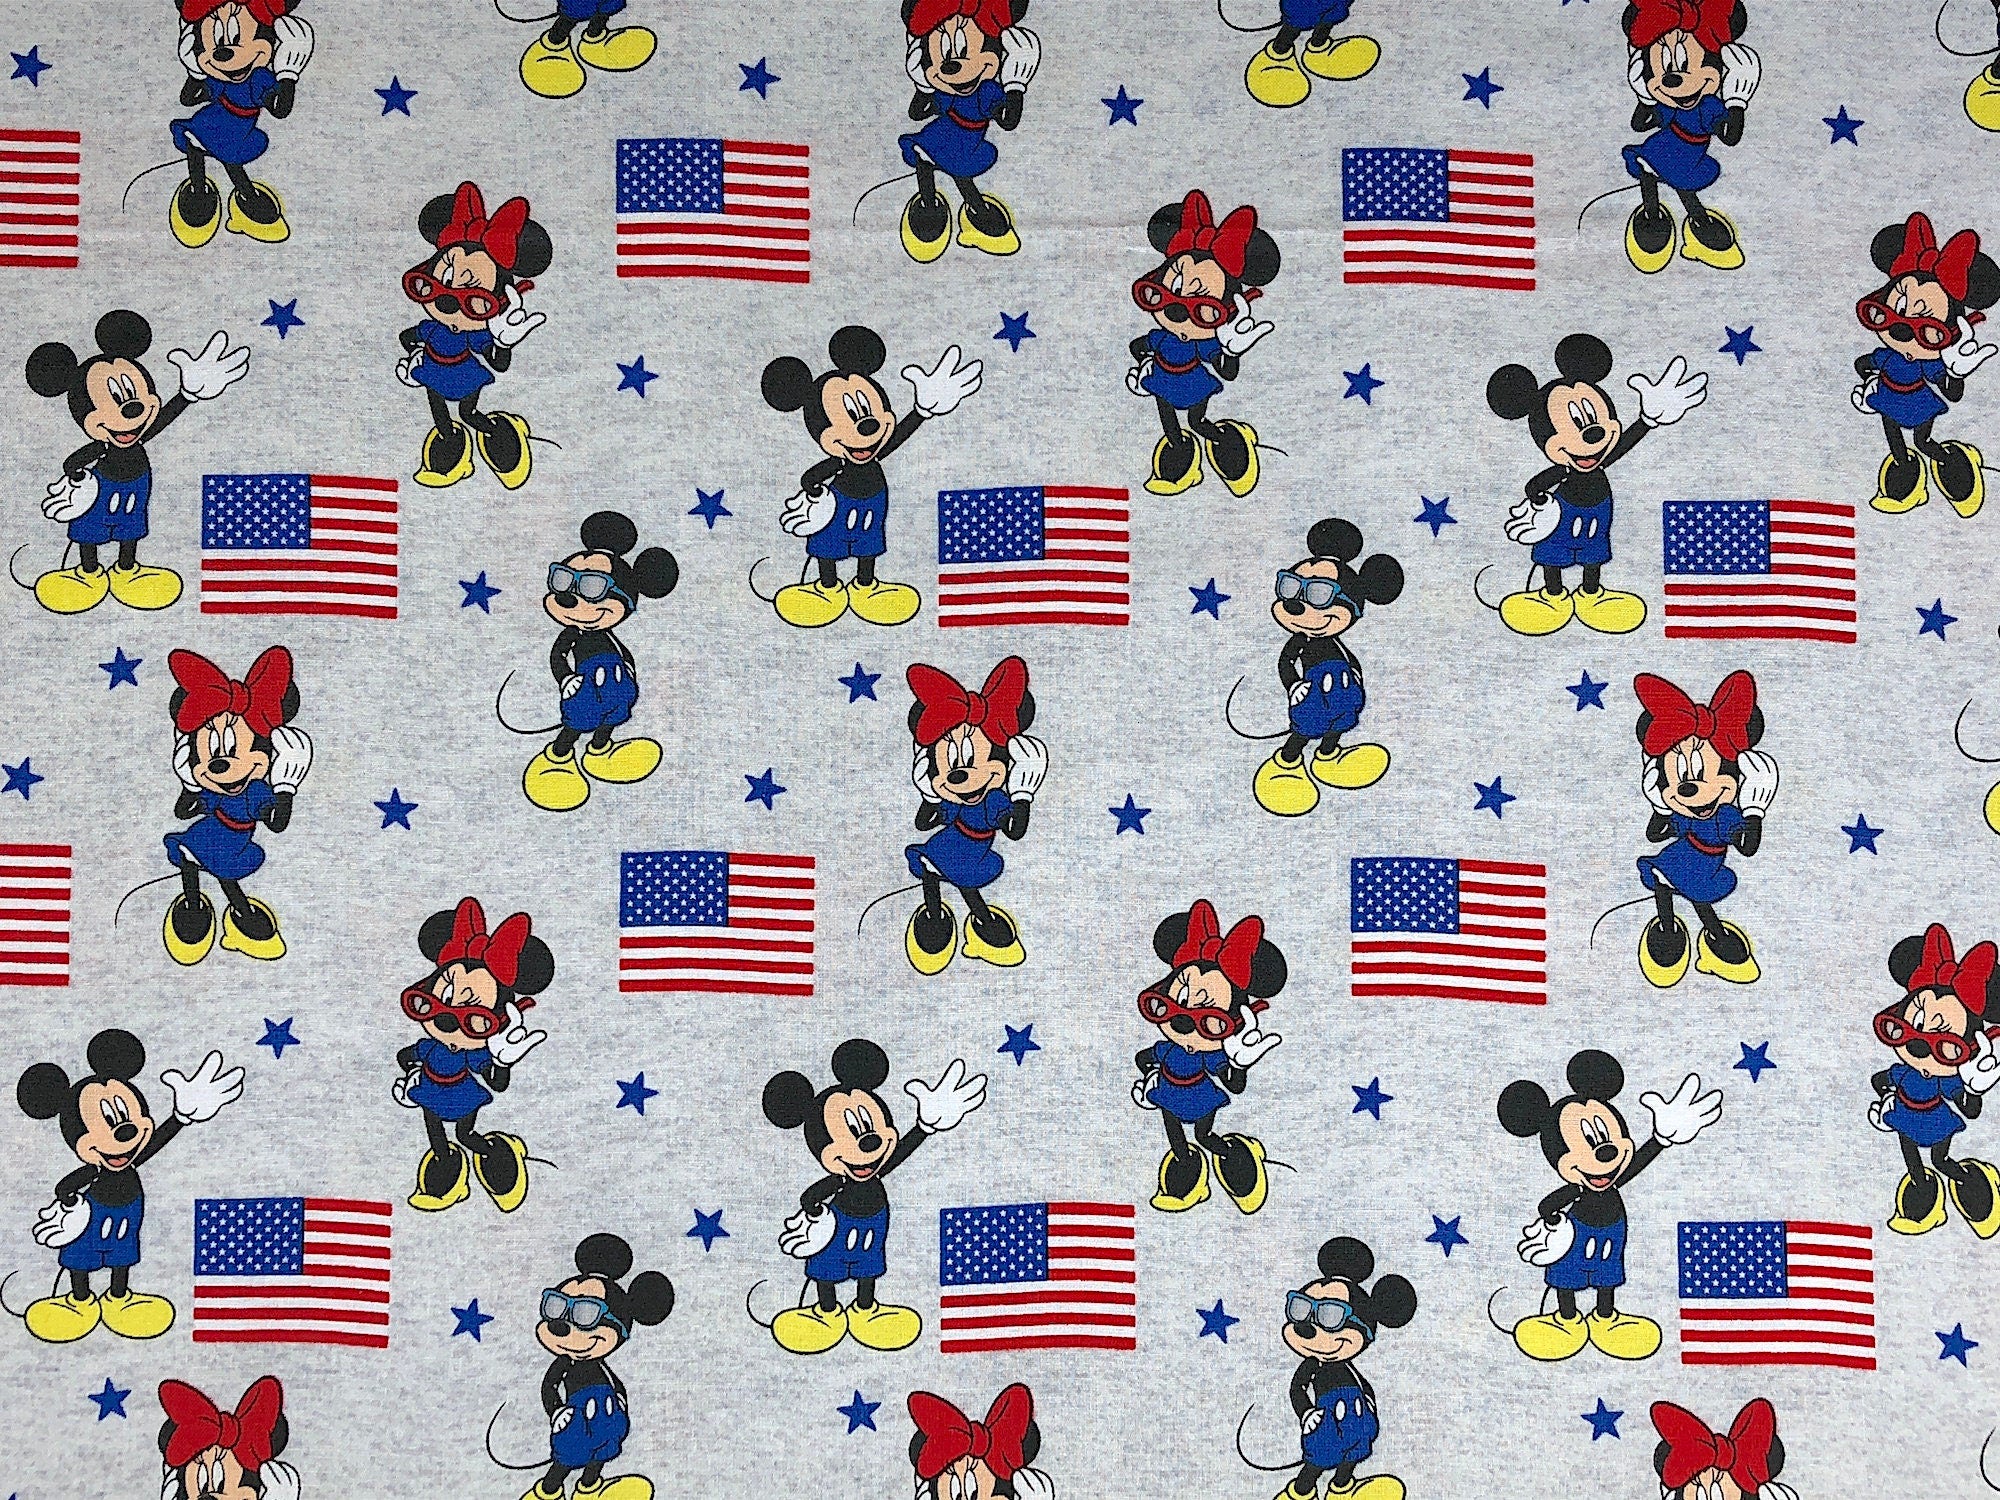 This Patriotic fabric is covered with Mickey and Minnie Mouse and USA flags.